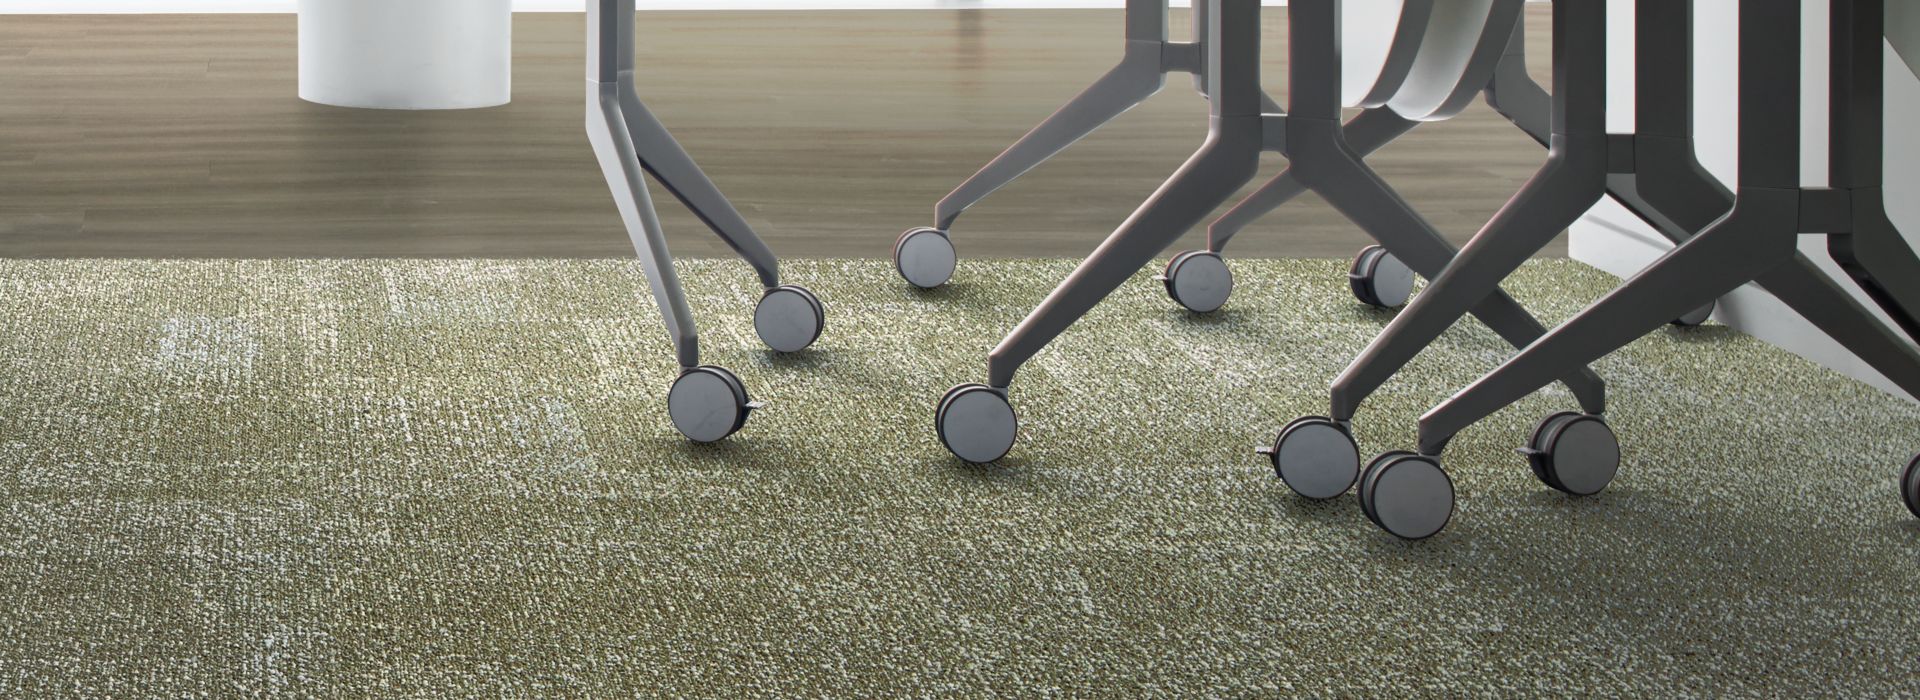 Interface Profile carpet tile and Studio Set LVT in meeting room with chairs and whiteboard